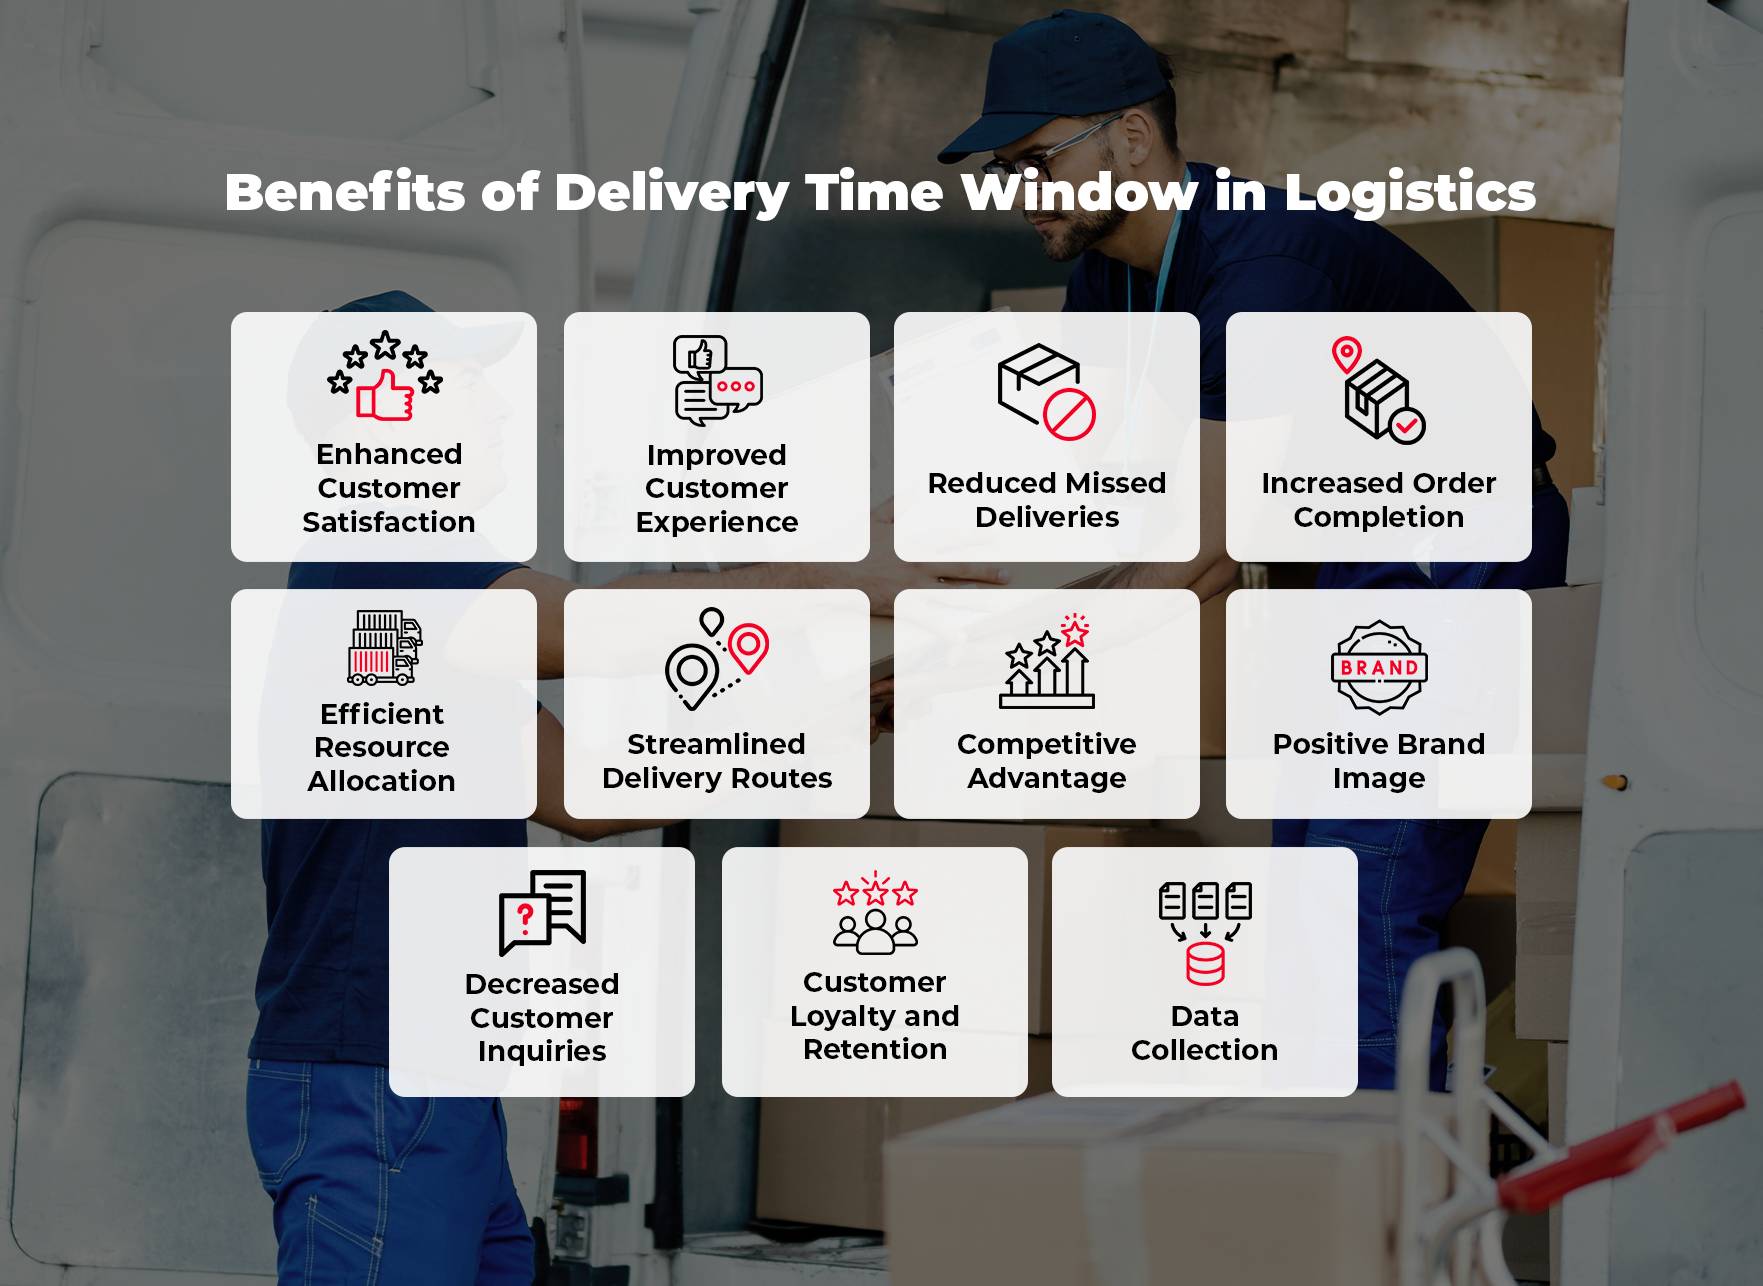 Benefits of using Delivery Time Windows in Retail, eCommerce, CEP, CPG and Transportation